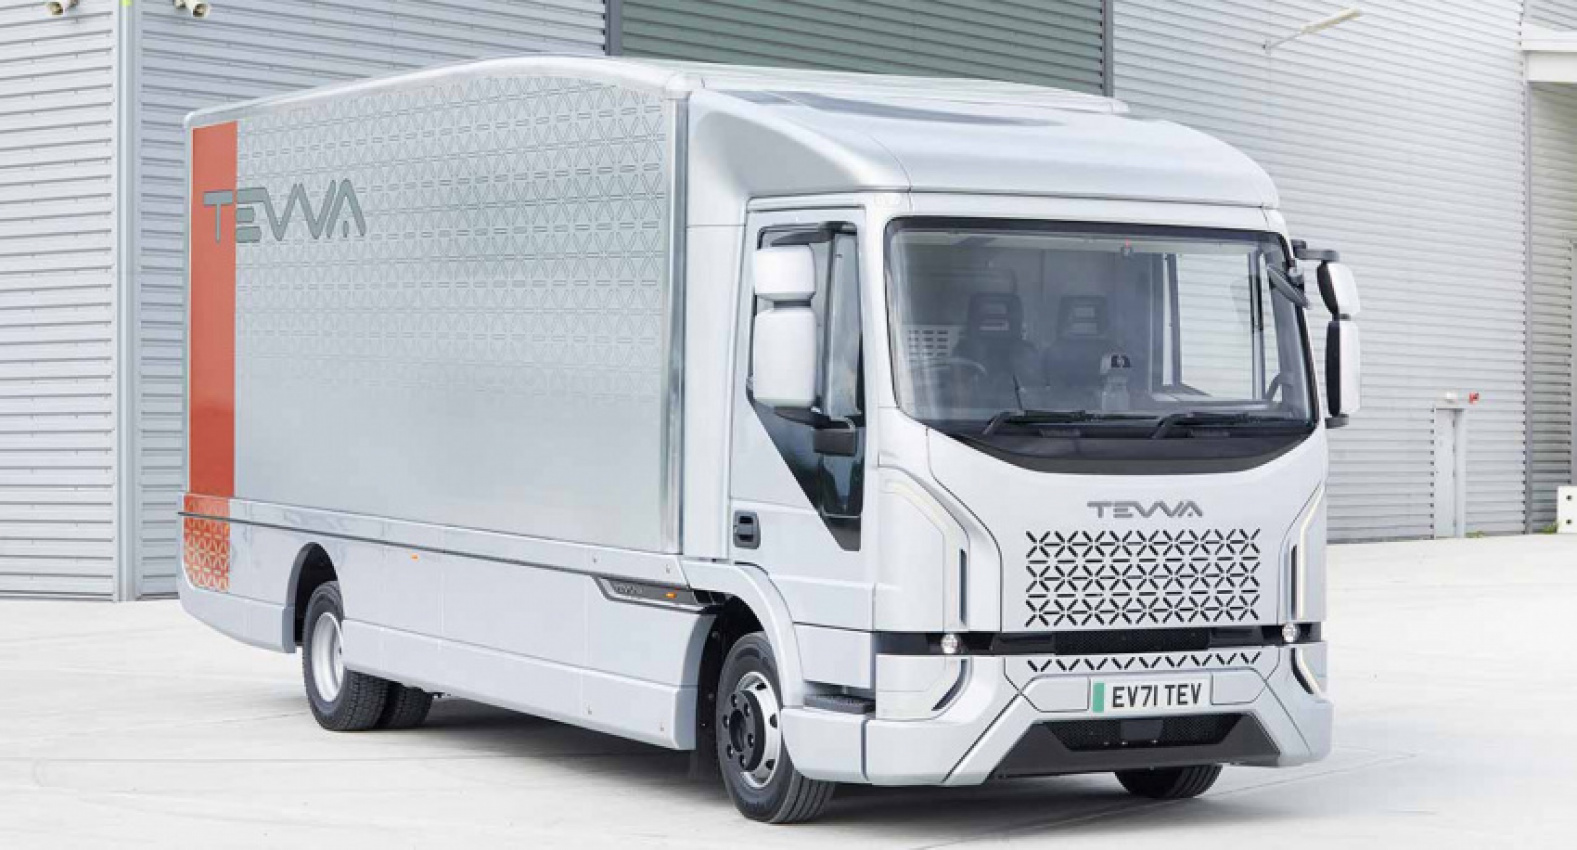 autos, cars, commercial vehicles, funding, tevva, tevva receives £4.2 million to develop new e-truck model